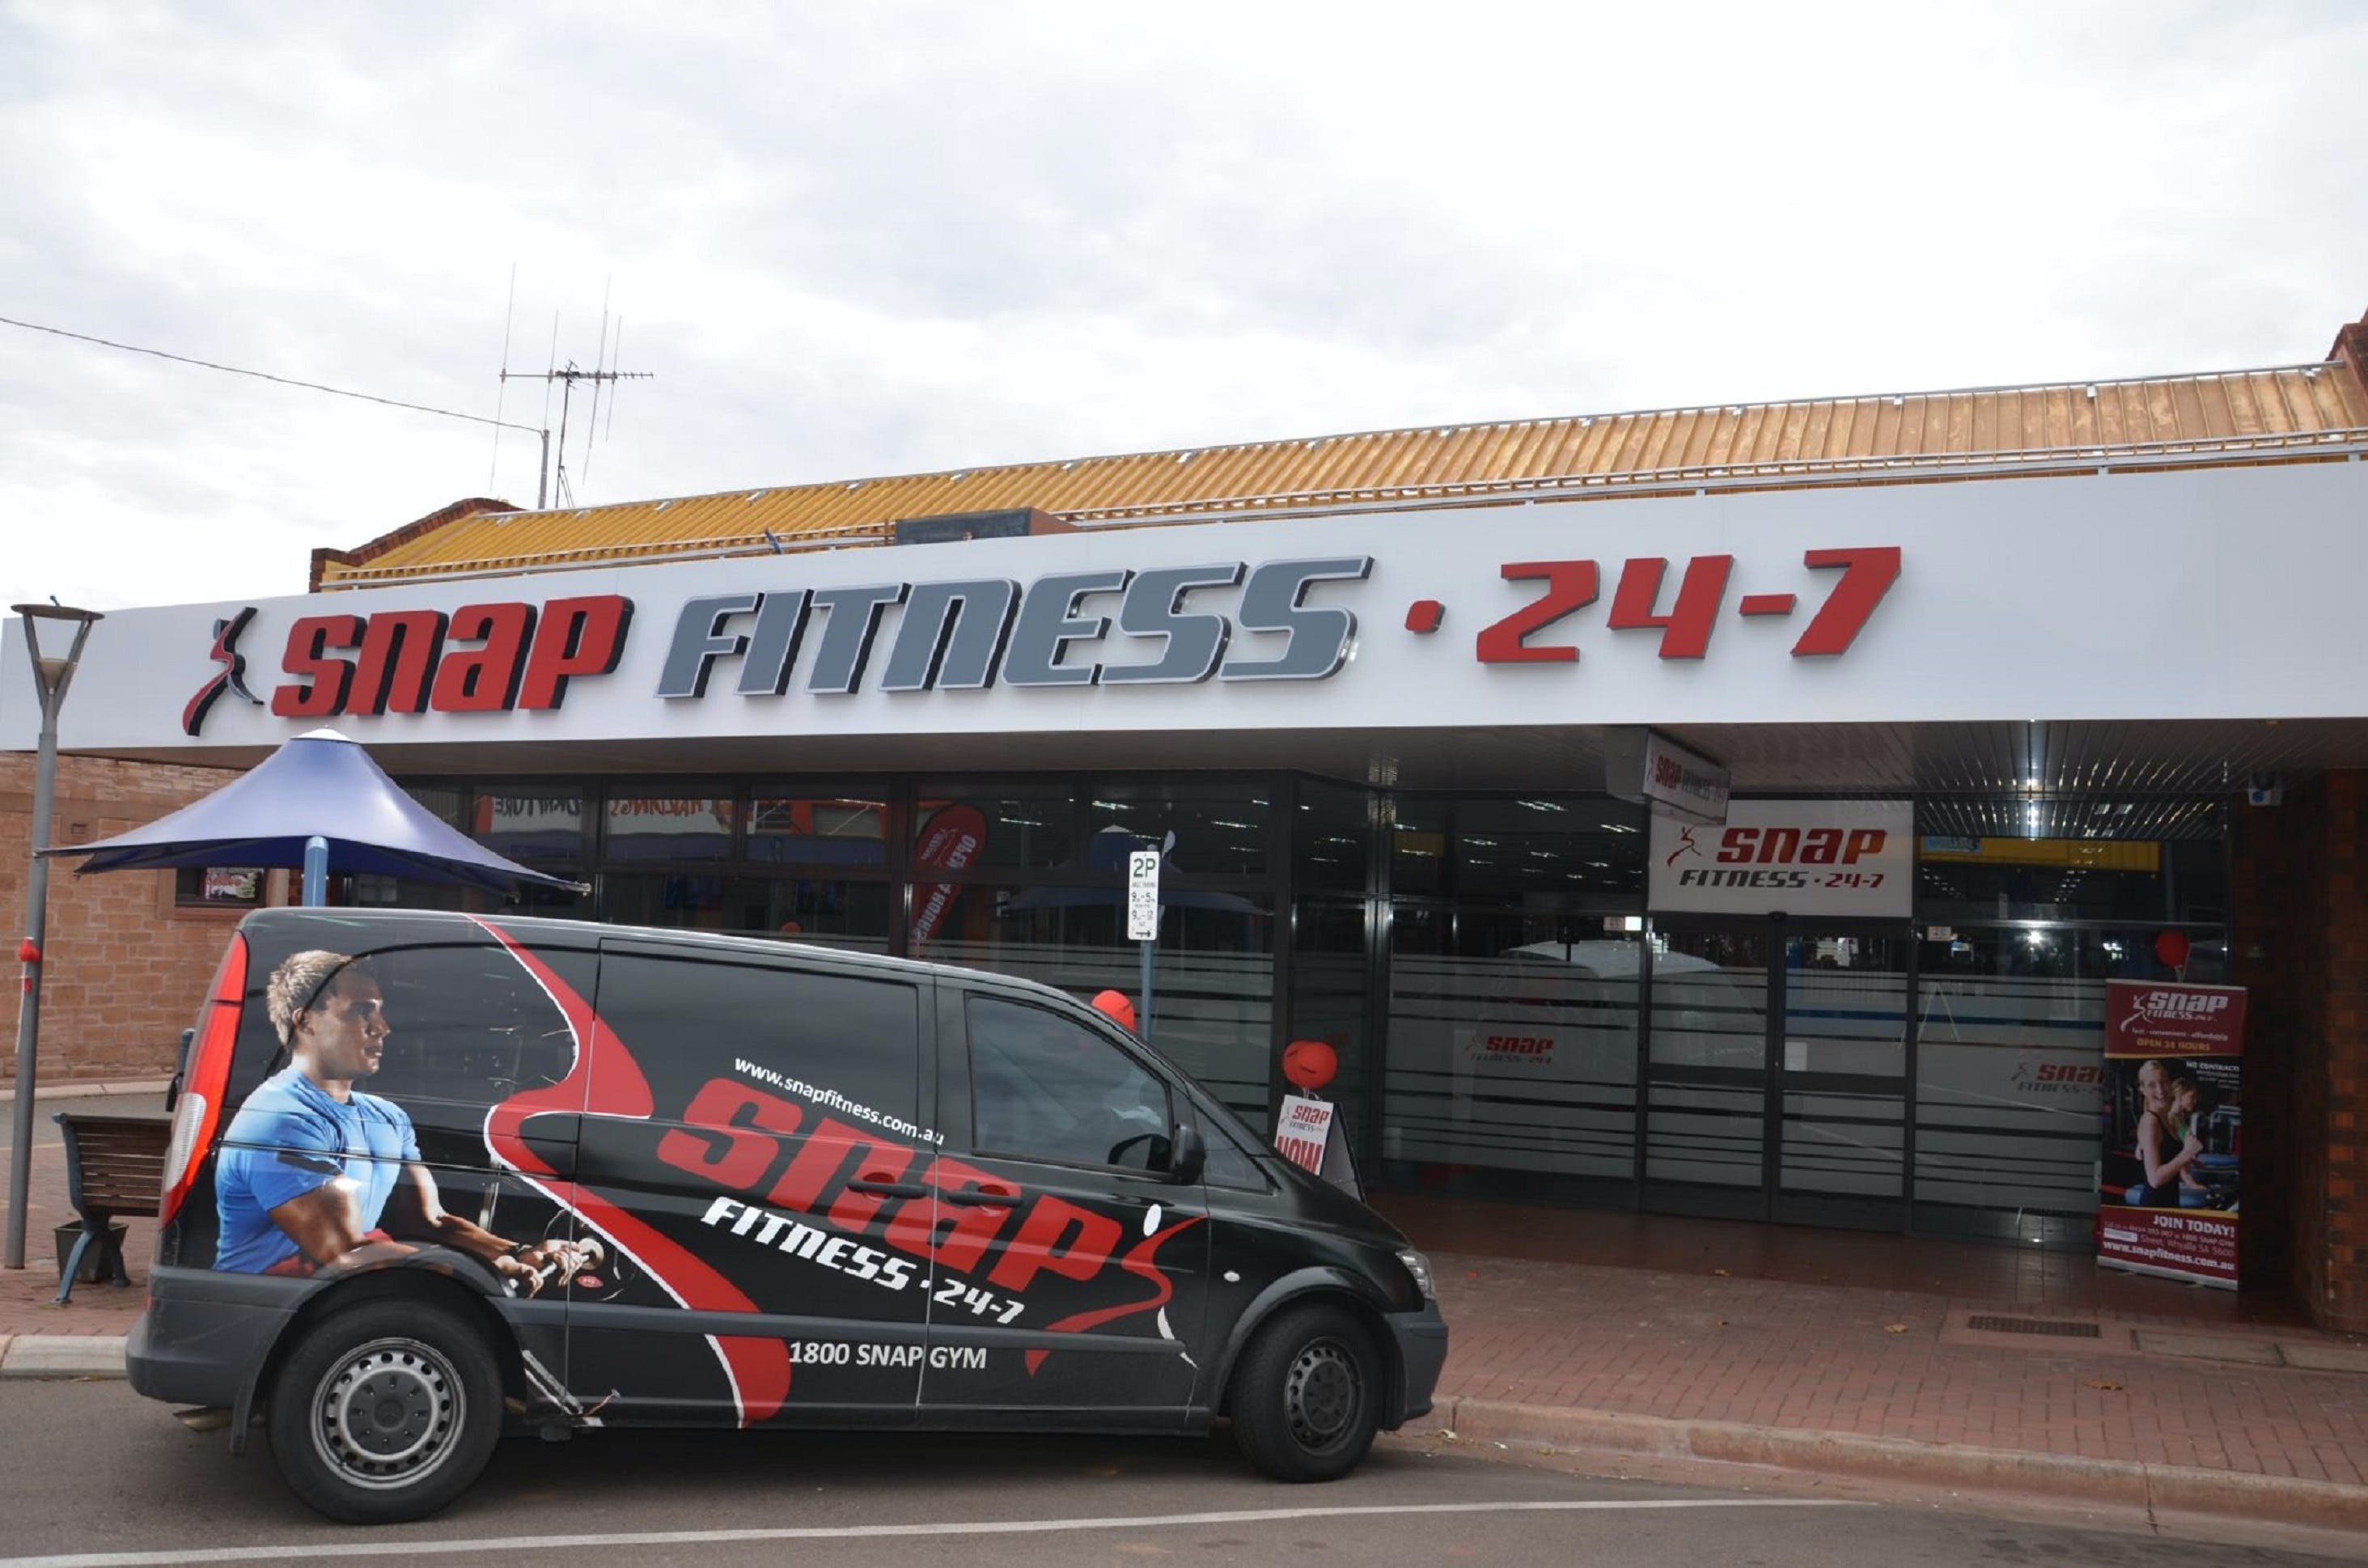 Snap Fitness Whyalla 24/7 gym - Tourism Cairns